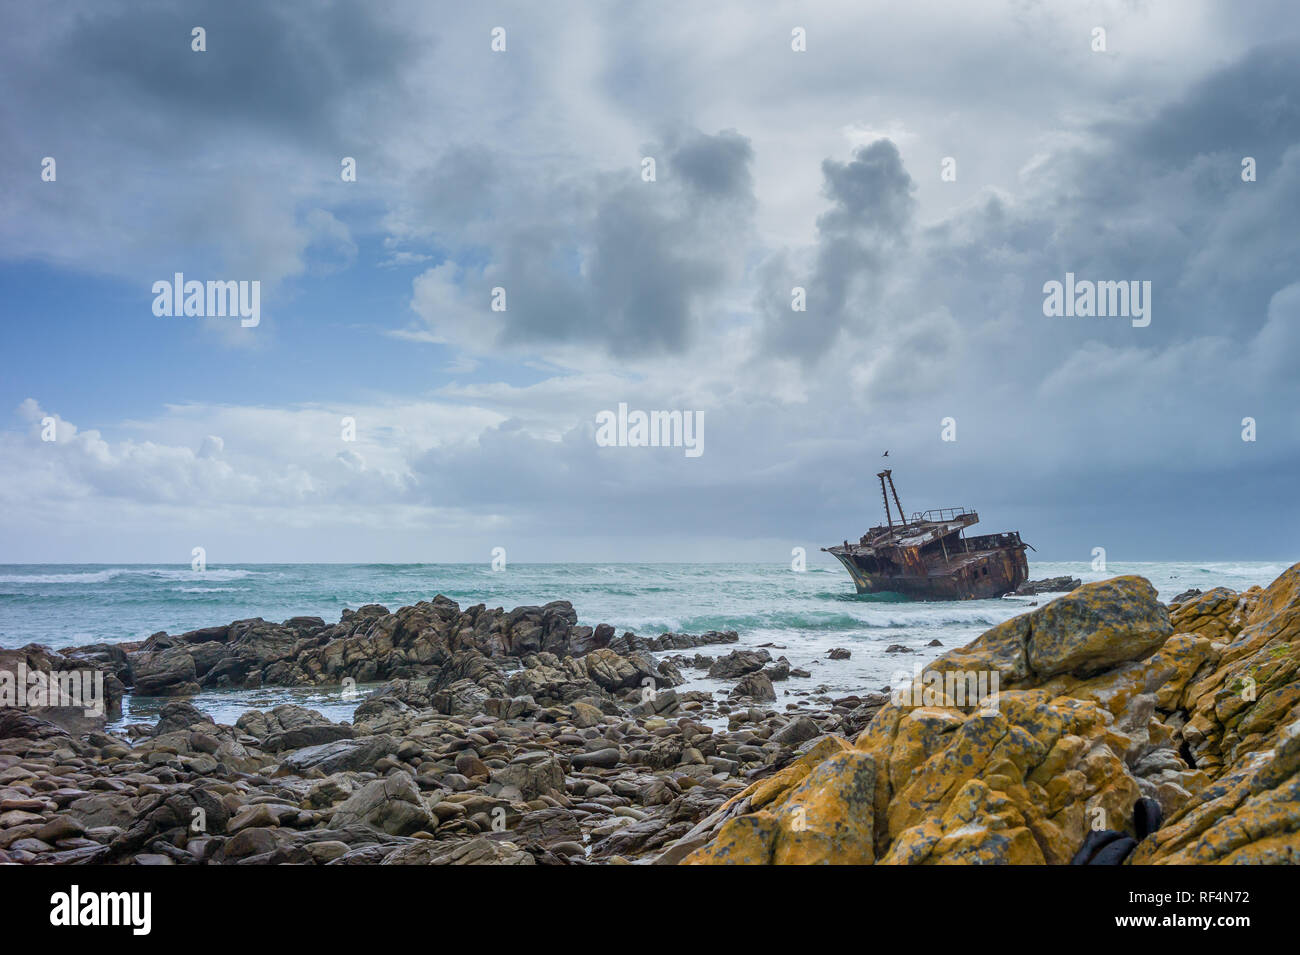 Cape Agulhas is notoriously dangerous for ships and despite the nearby lighthouse, the Meisho Maru no 38, a small Japanese fishing vessel, ran aground Stock Photo